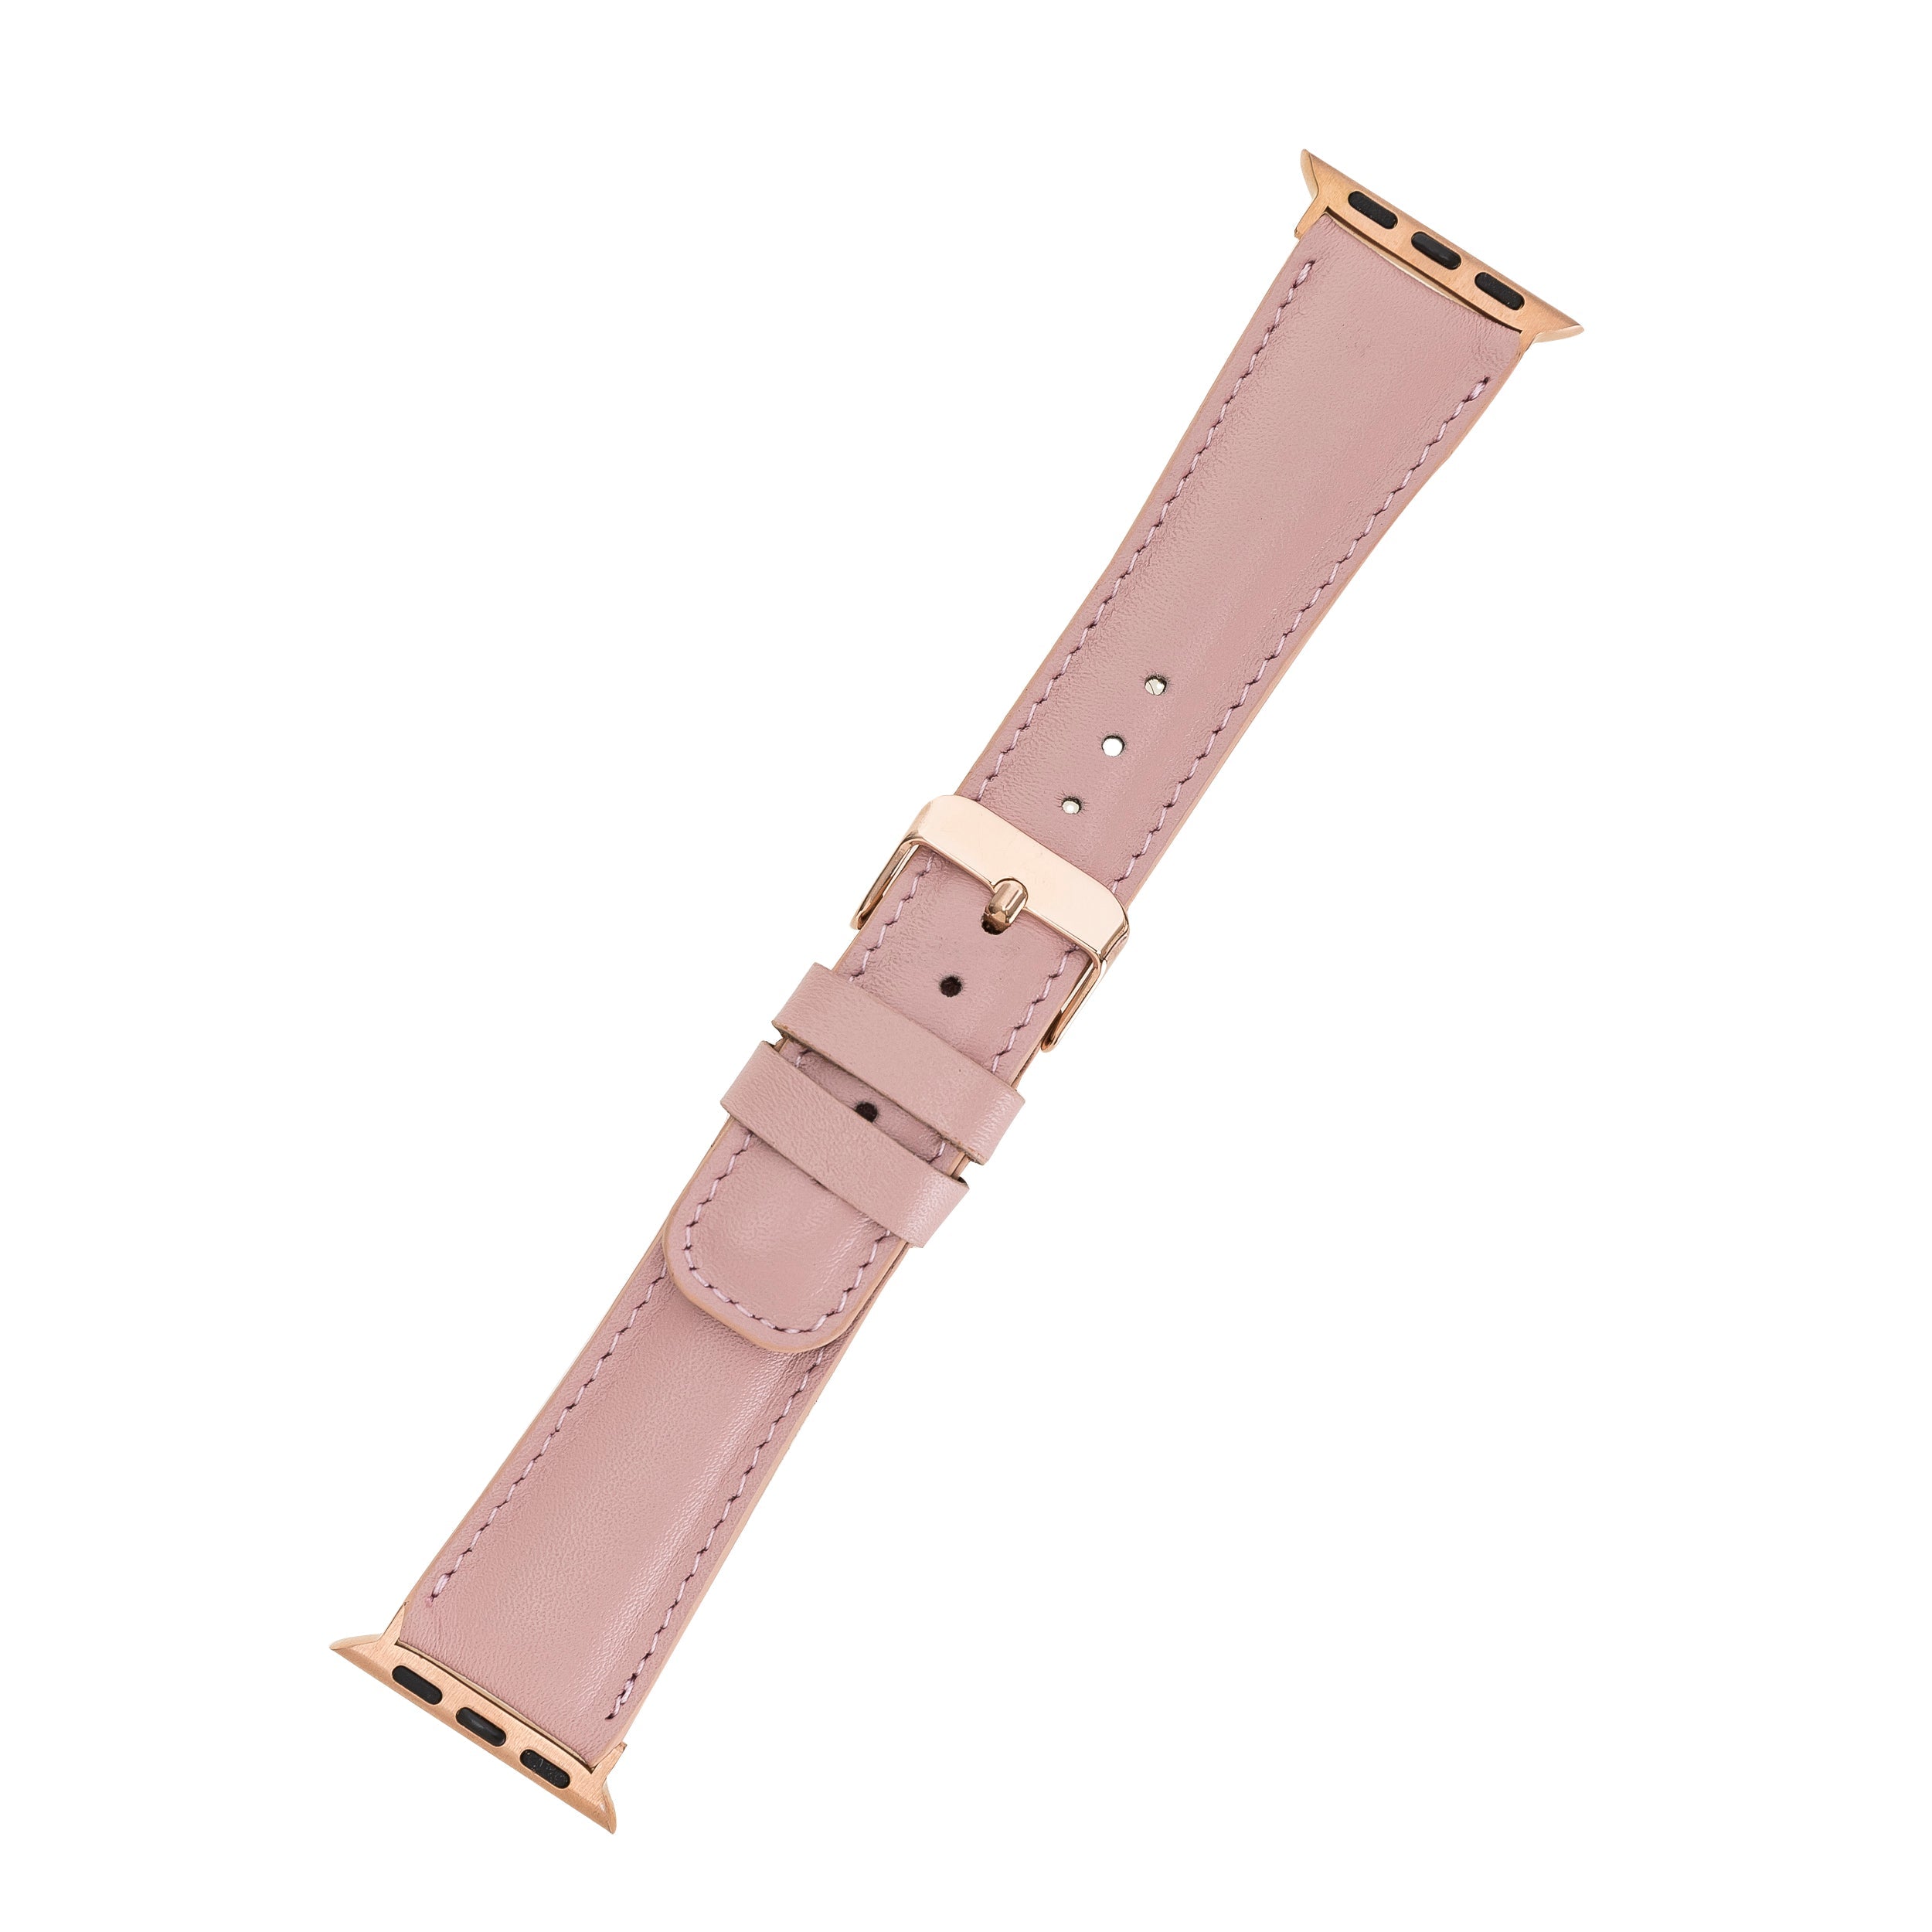 LupinnyLeather Liverpool Collection Leather Watch Band for Apple & Fitbit Versa Watch Band 12